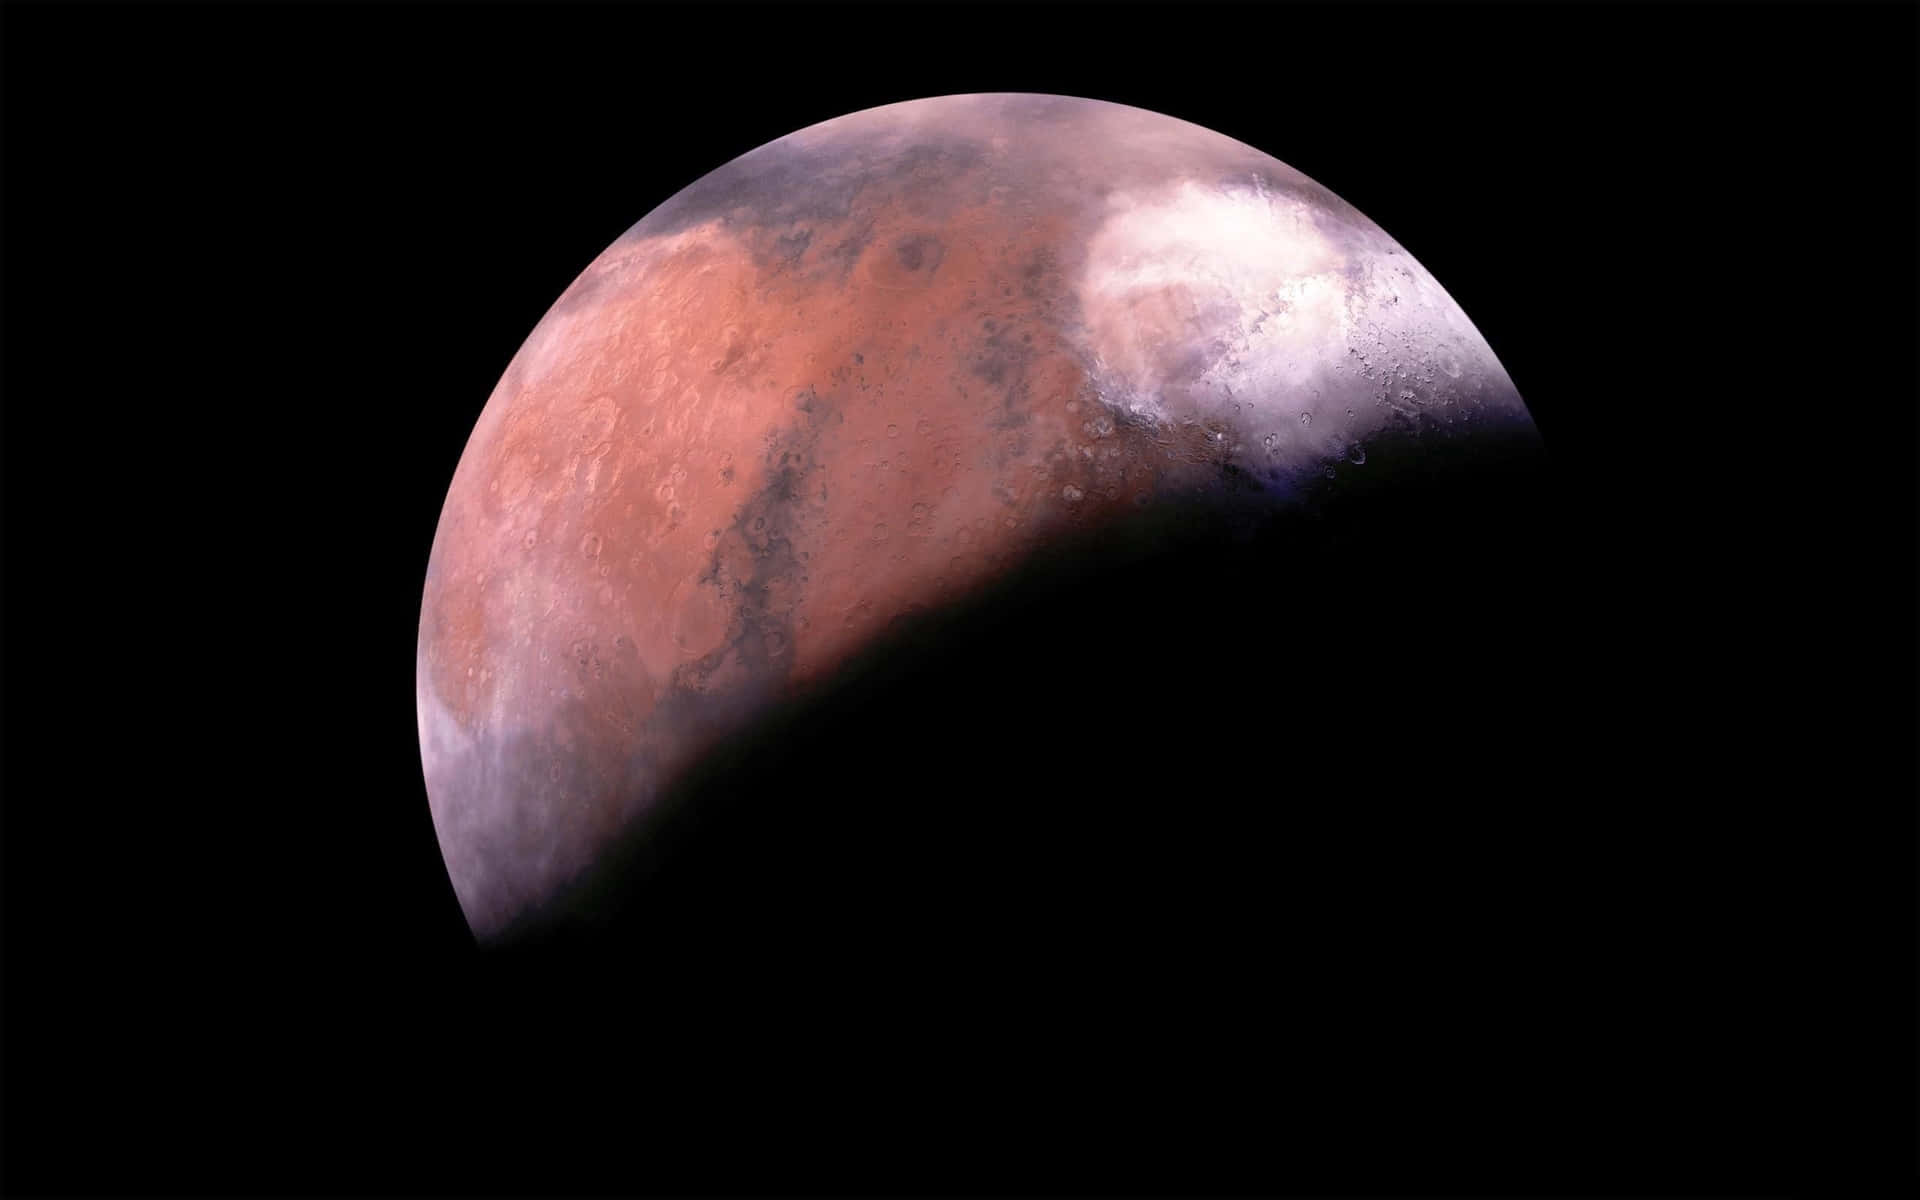 "The Red Planet, Mars"